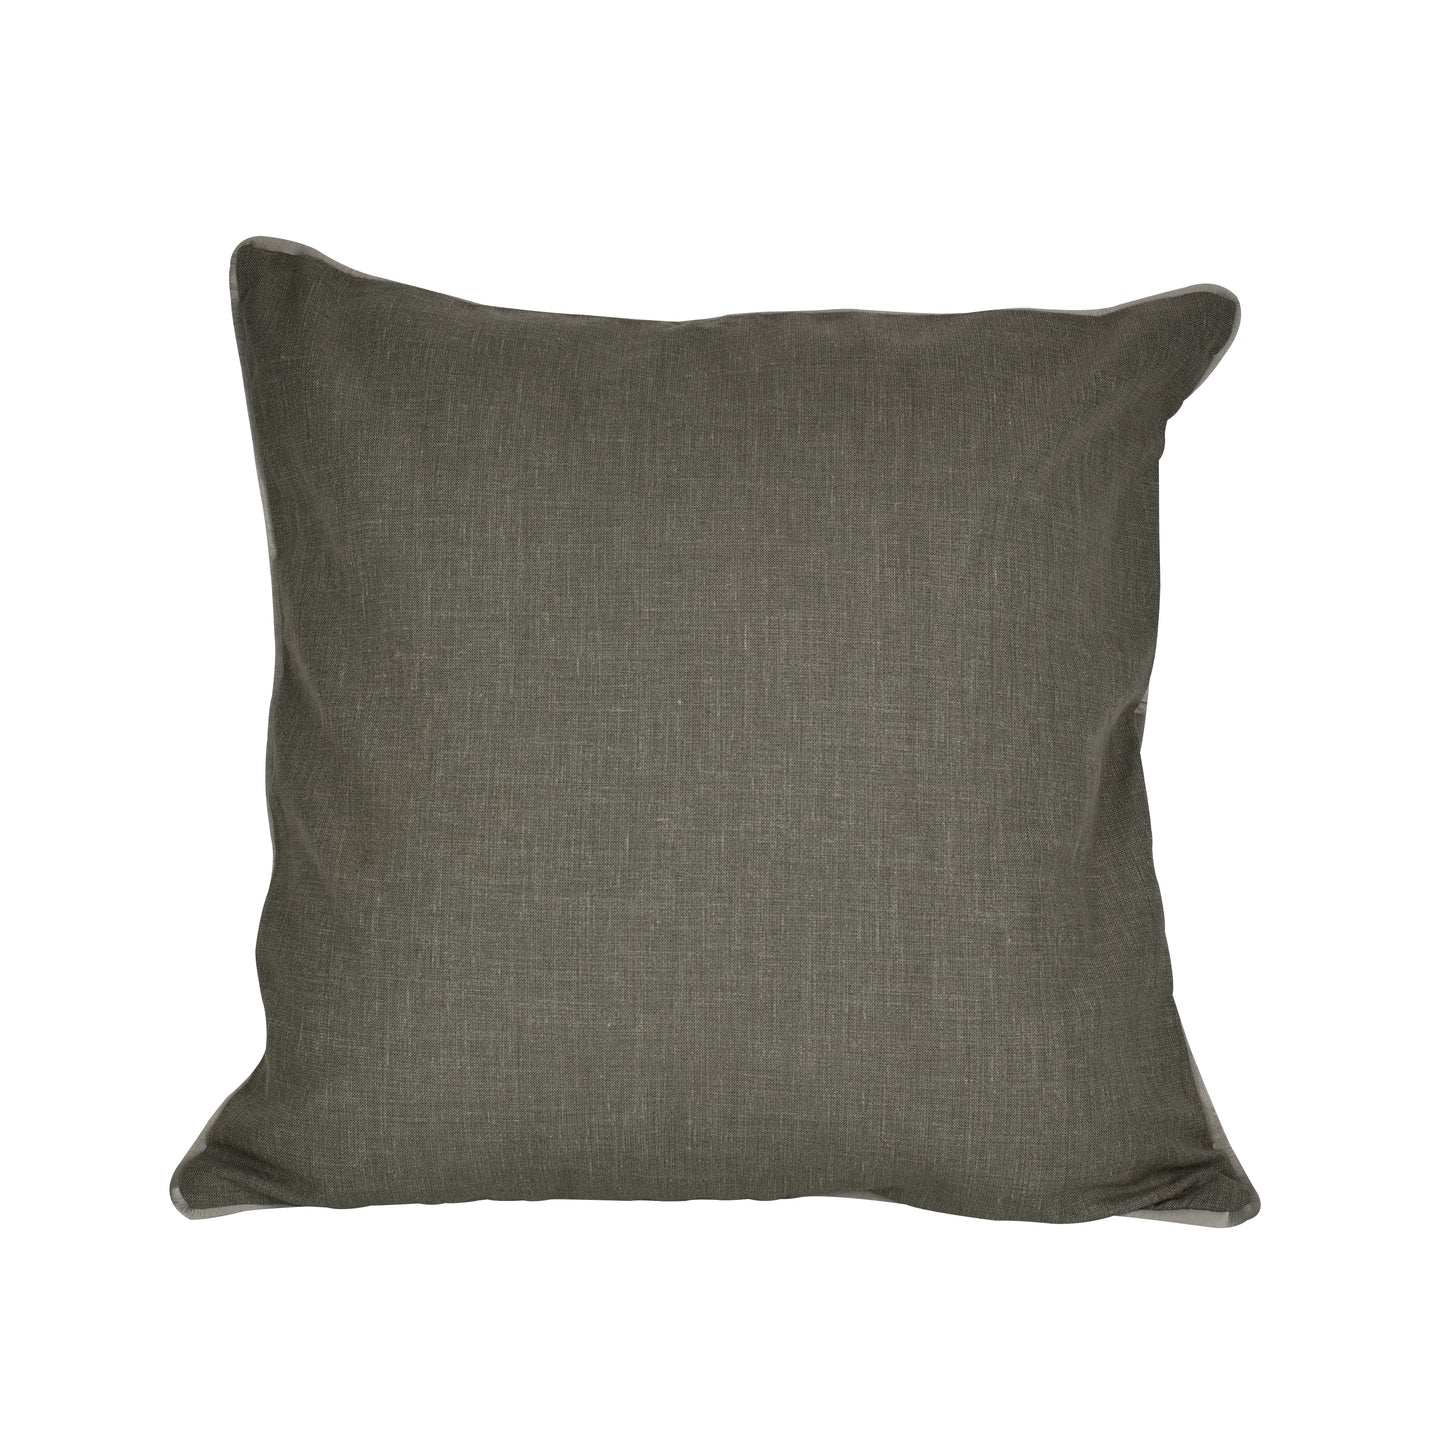 'Grey Snugs' Solid Linen Cushion Cover Piping (16 x 16 Inch)